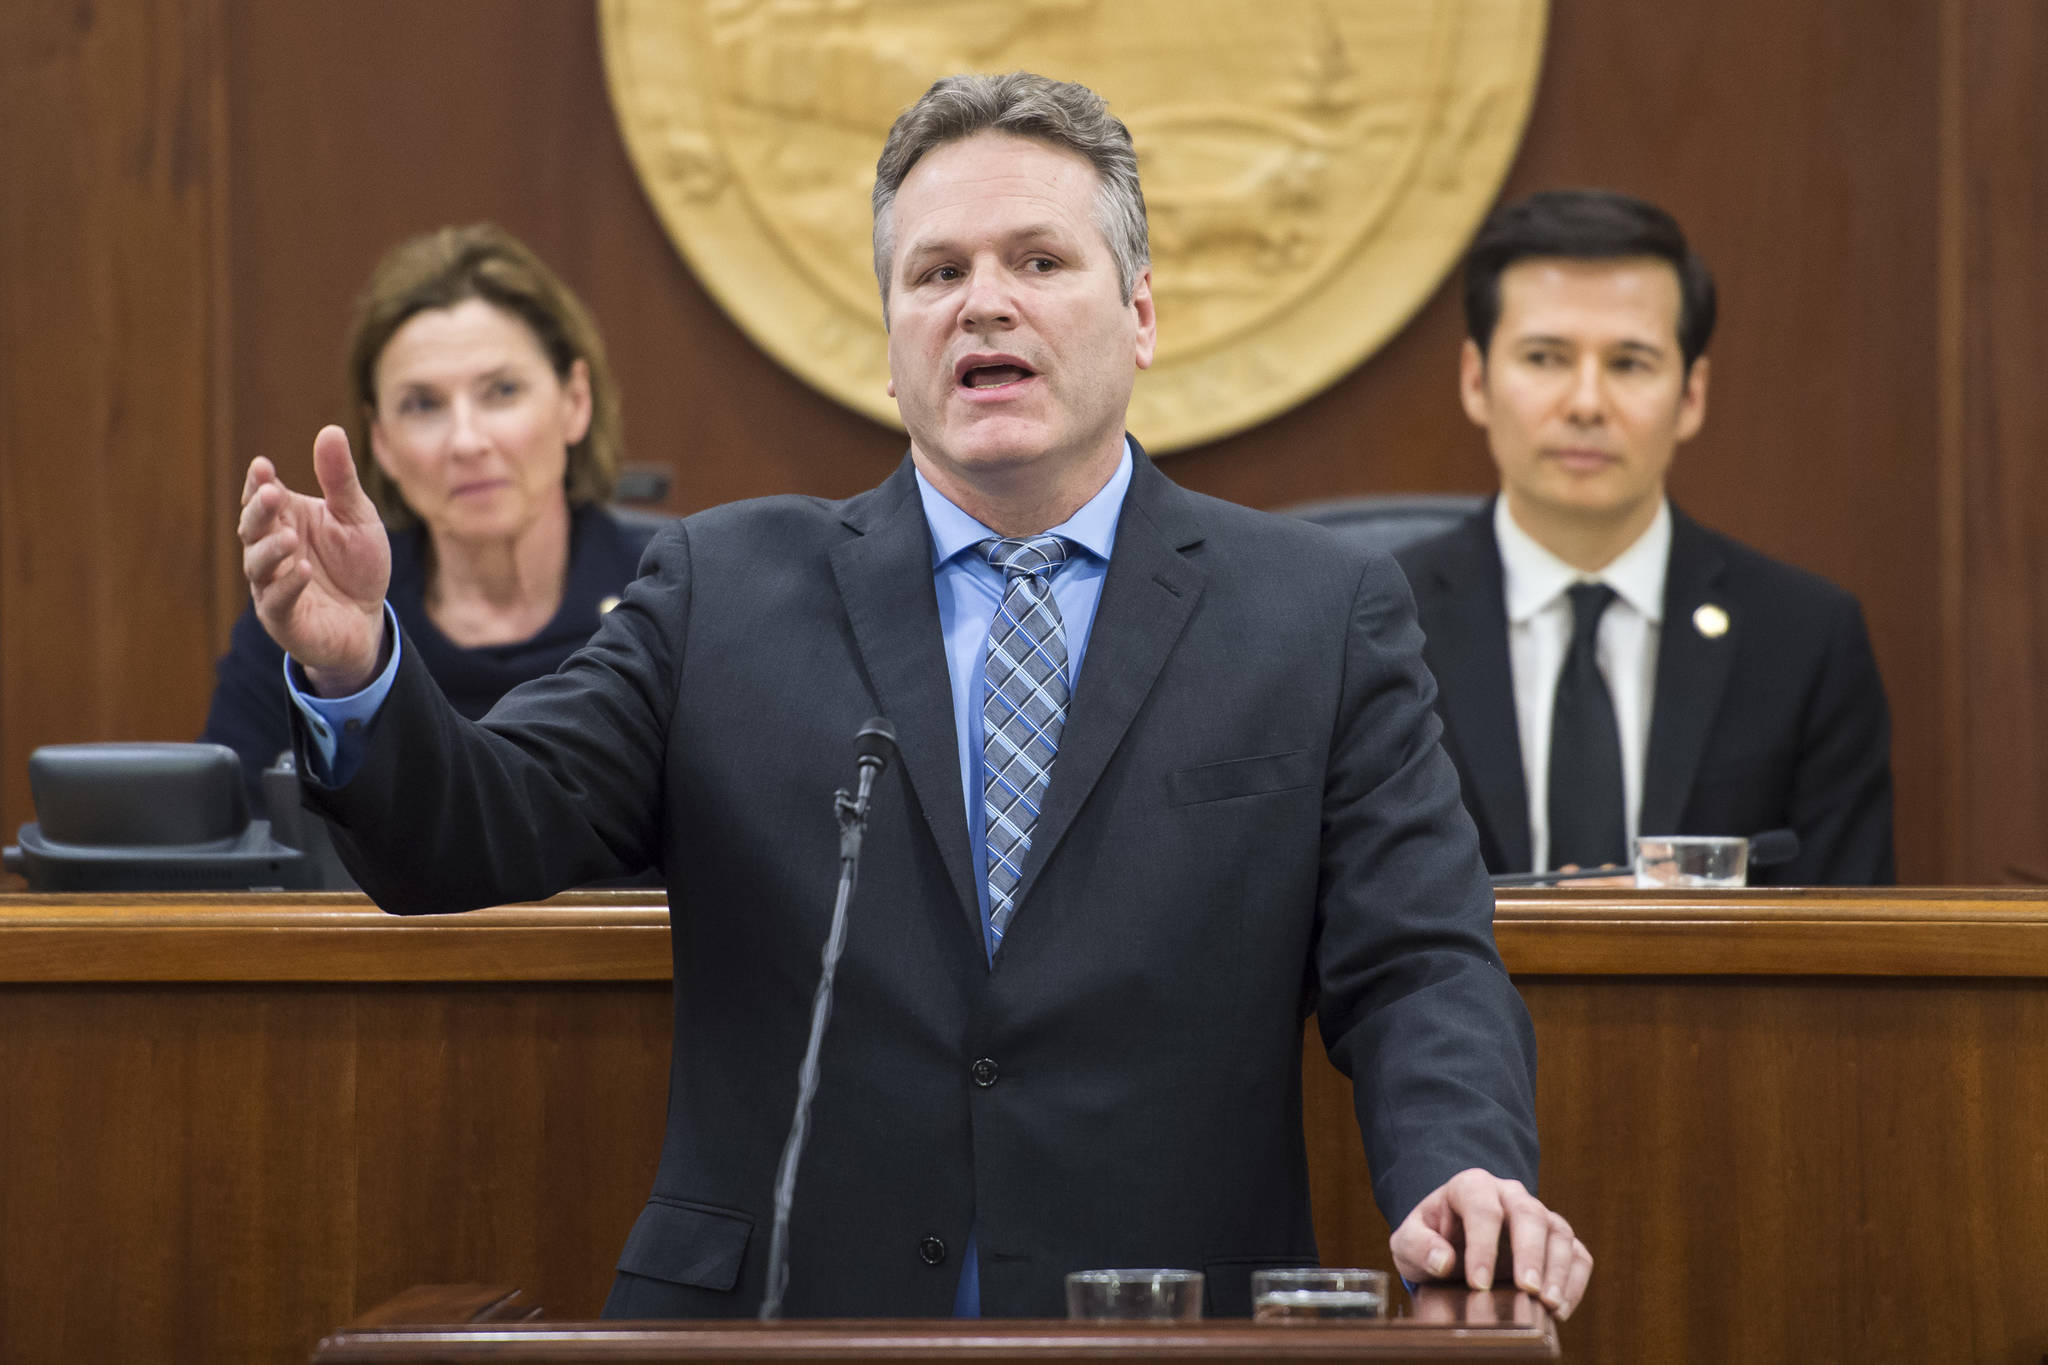 Gov. Mike Dunleavy give his State of the State speech to a Joint Session of the Alaska Legislature as Senate President Cathy Giessel, R-Anchorage, left, and House Speaker Pro Tempore Rep. Neal Foster, D-Nome, listen at the Capitol on Tuesday, Jan. 22, 2019. (Michael Penn | Juneau Empire)